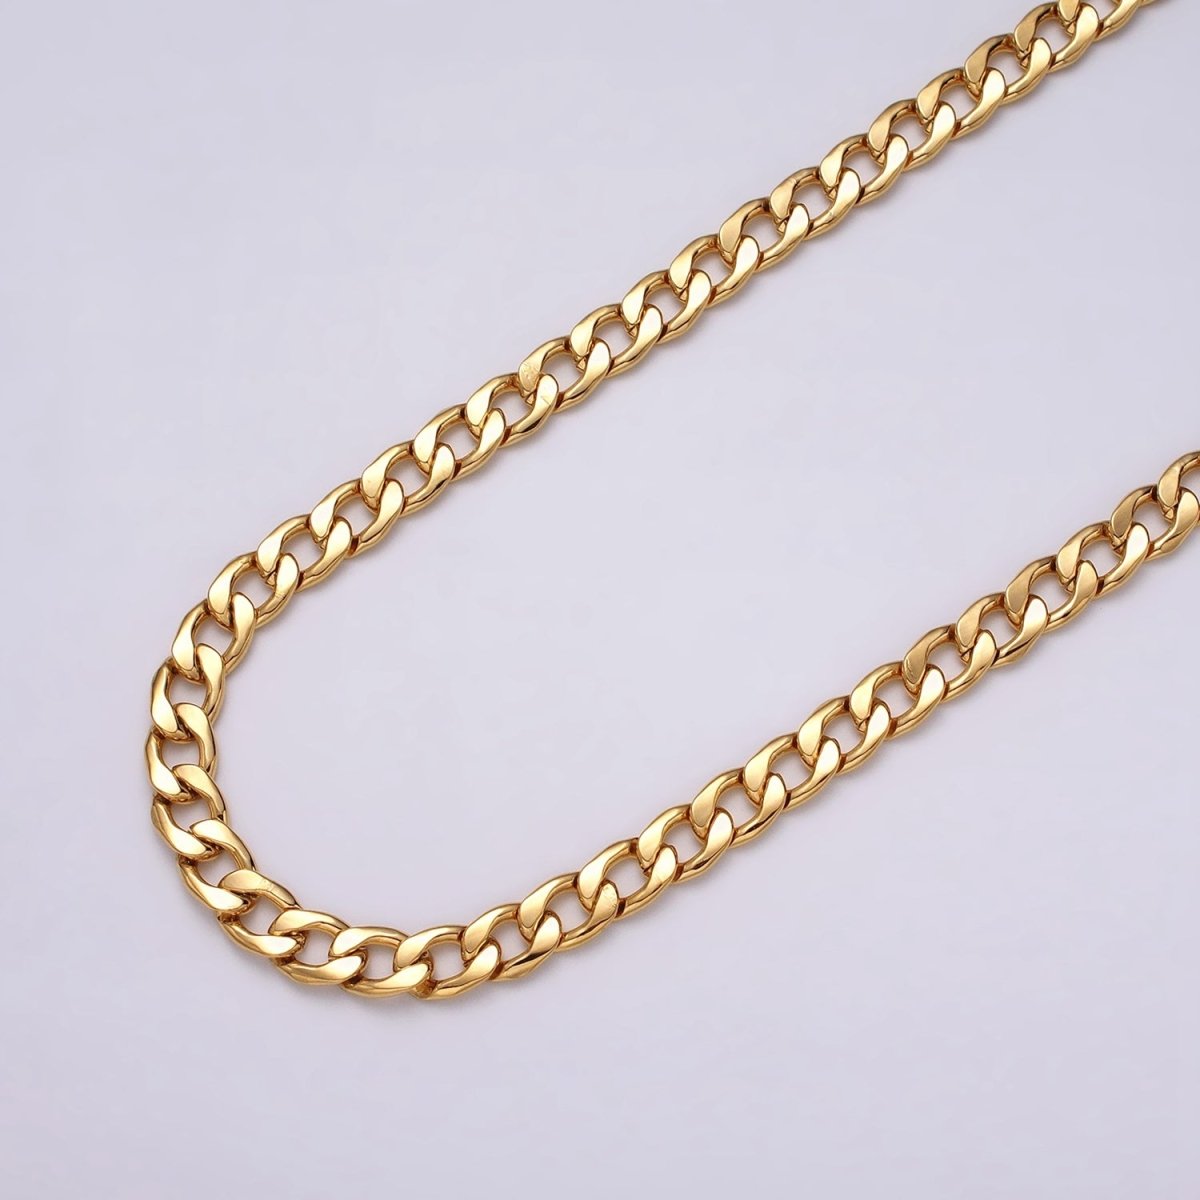 24k Gold Filled Cuban Curb Chain 7.5mm Unfinished Unisex Curb Link Chain by Yard Wholesale Jewelry Making Supplies | ROLL-1283 ROLL-1284 Clearance Pricing - DLUXCA